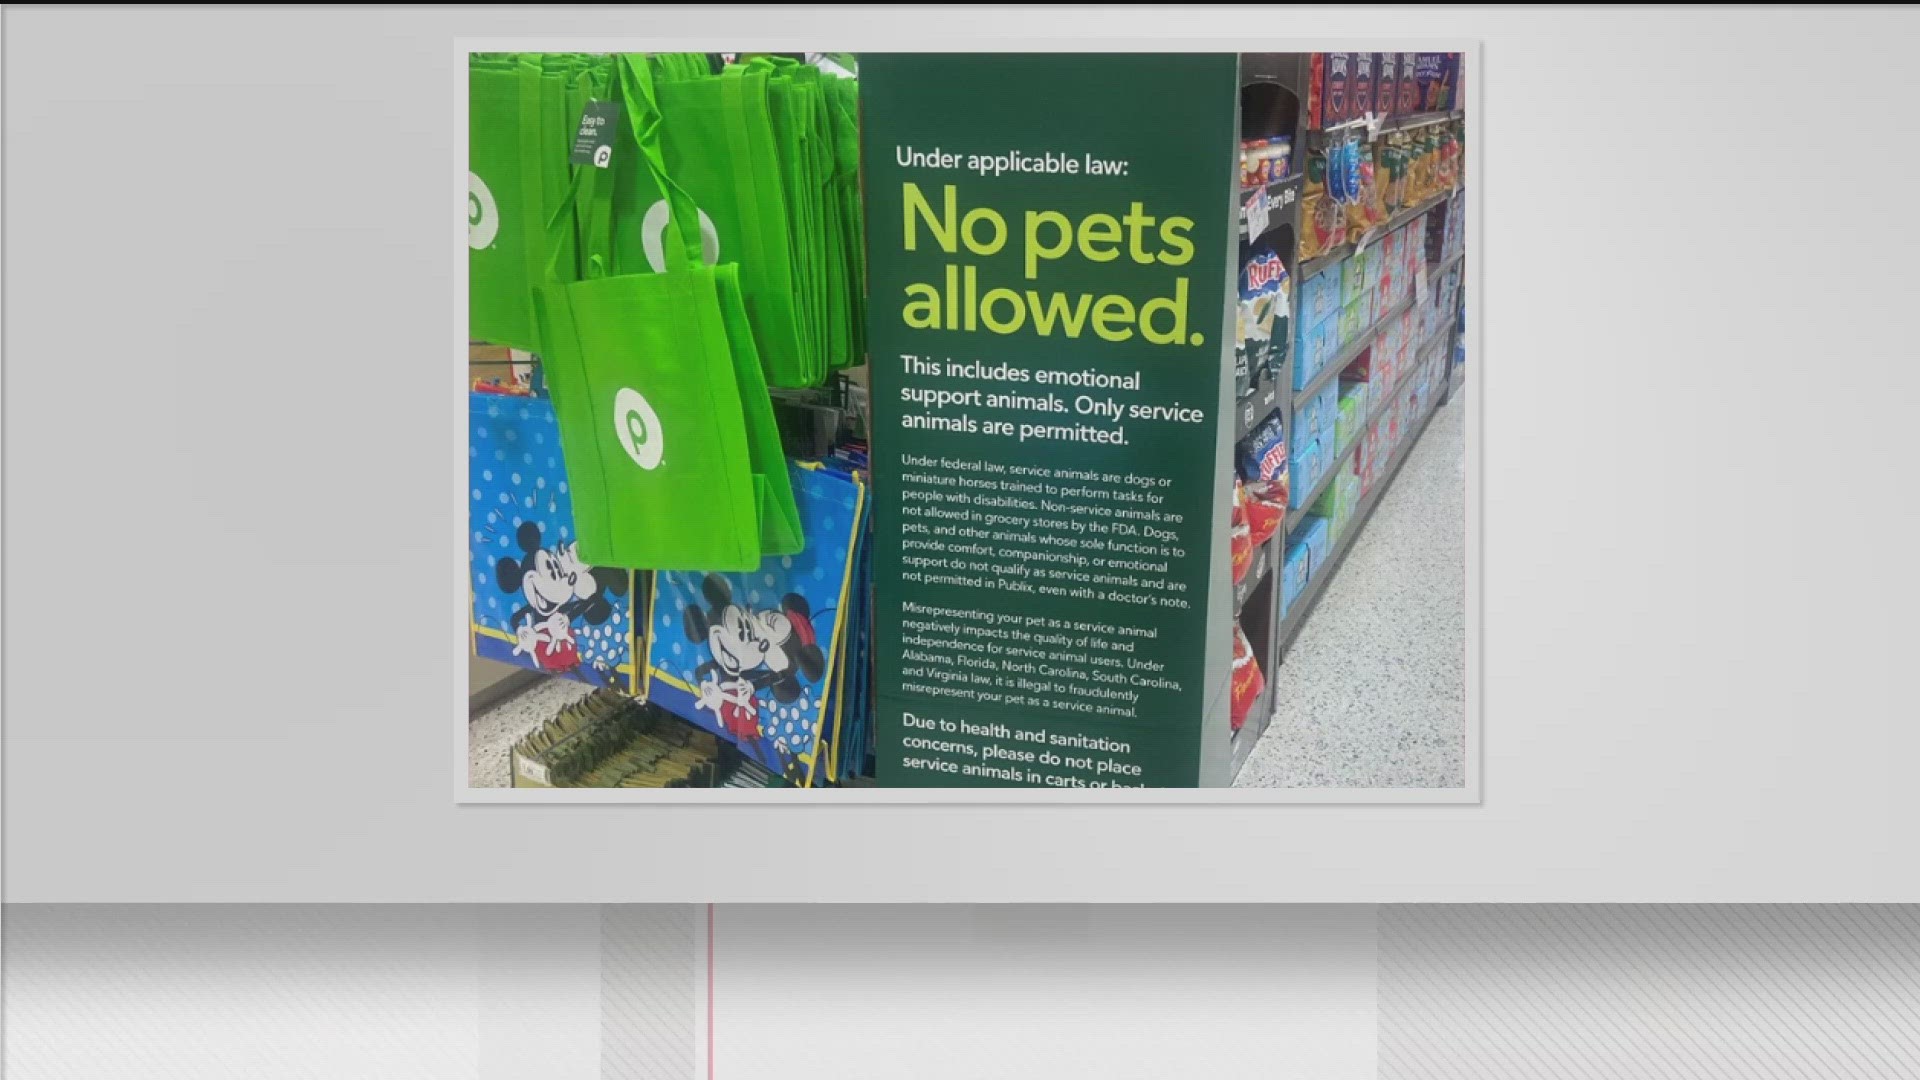 New signs placed at the entrance of all Publix locations are cracking down on customers bringing in pets while they shop.